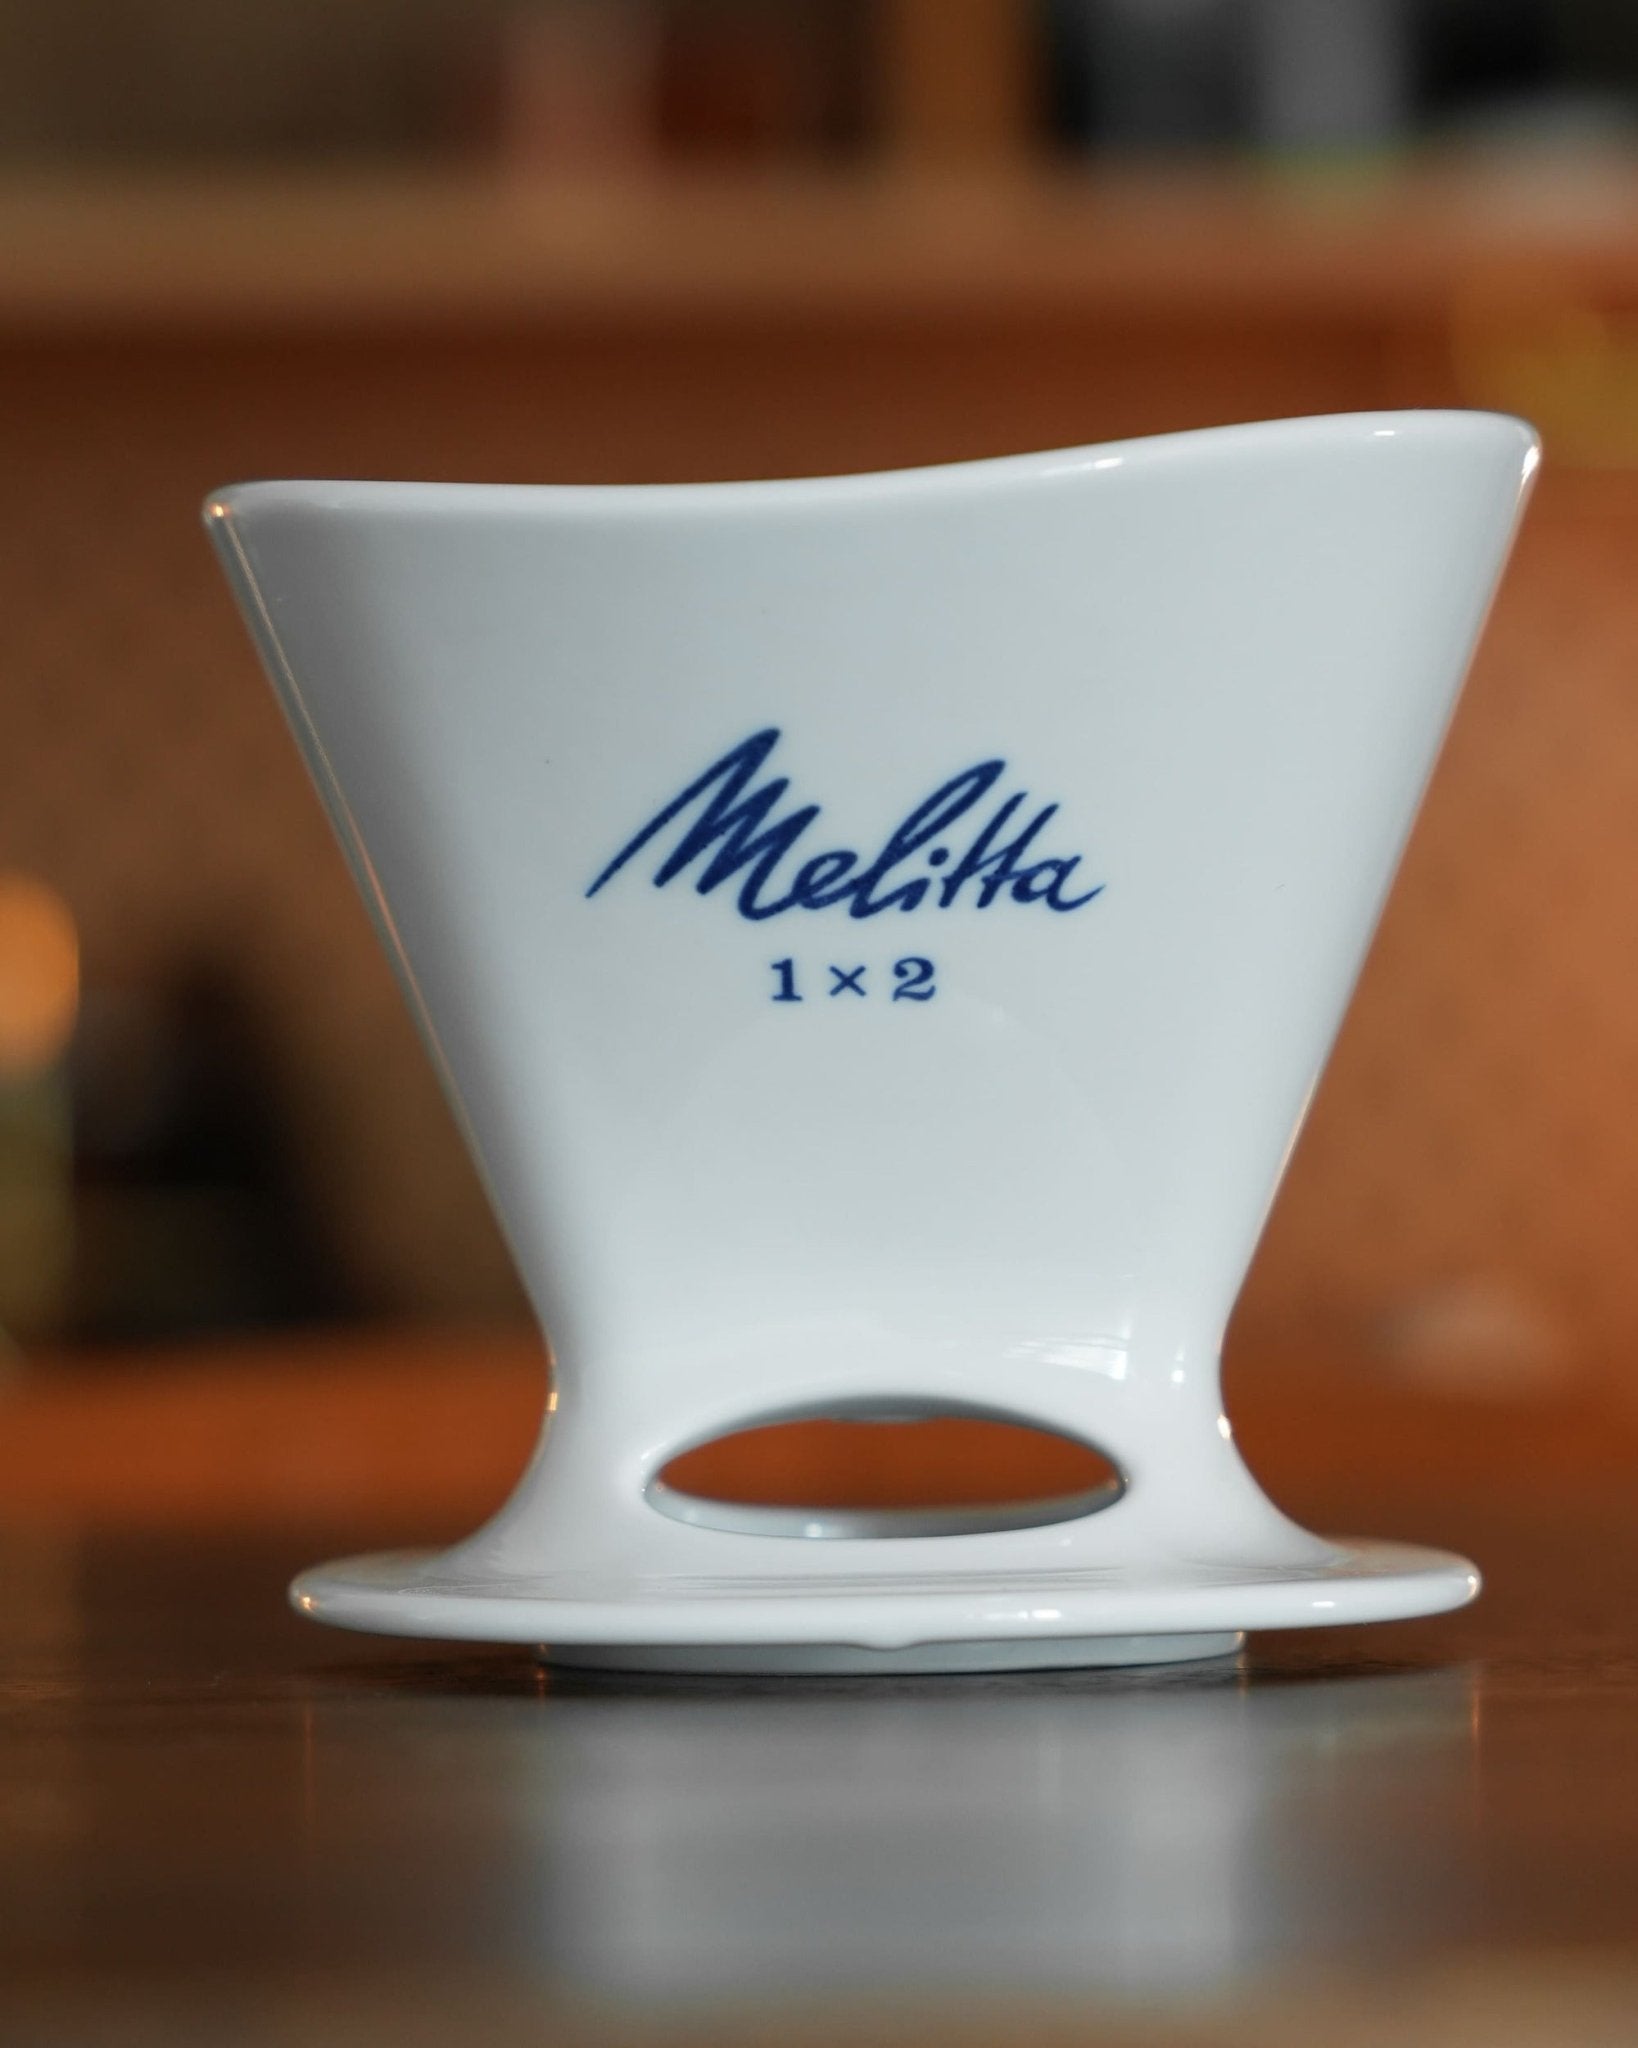 Melitta White 1-Cup Pour-Over Porcelain - Coffee Roaster